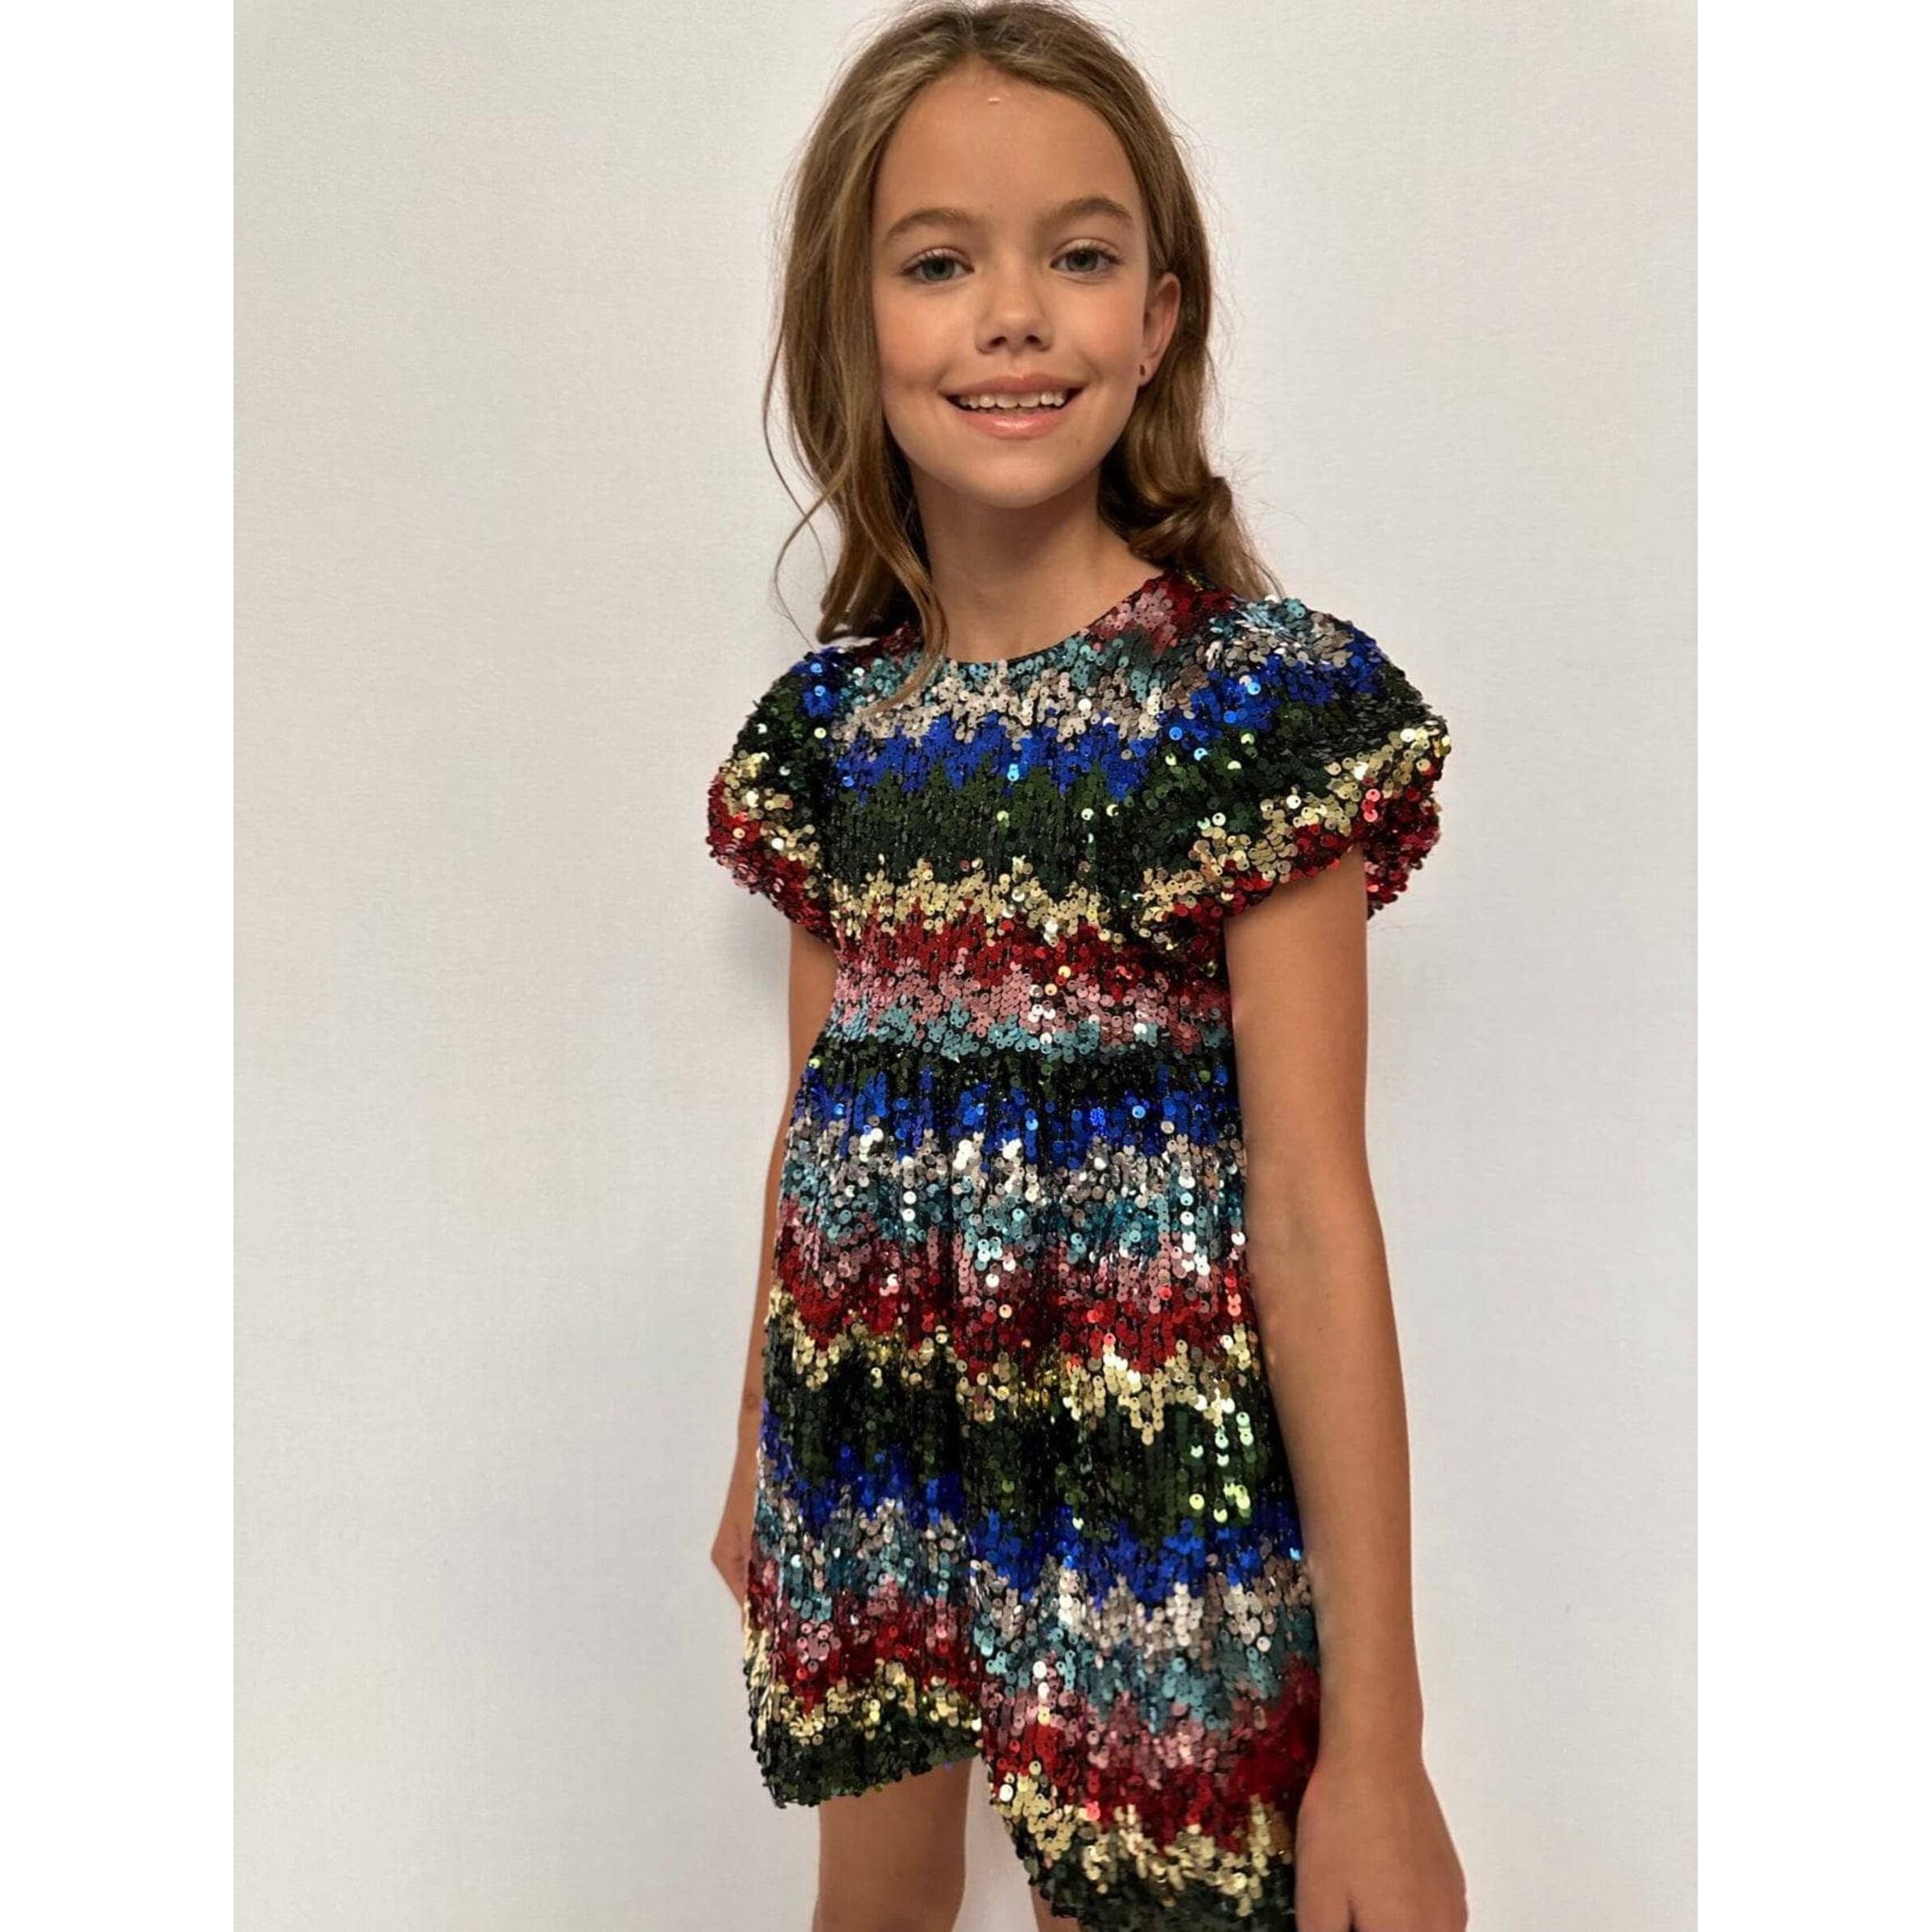 girl wearing short sleeved dress covered in holiday colored sequins